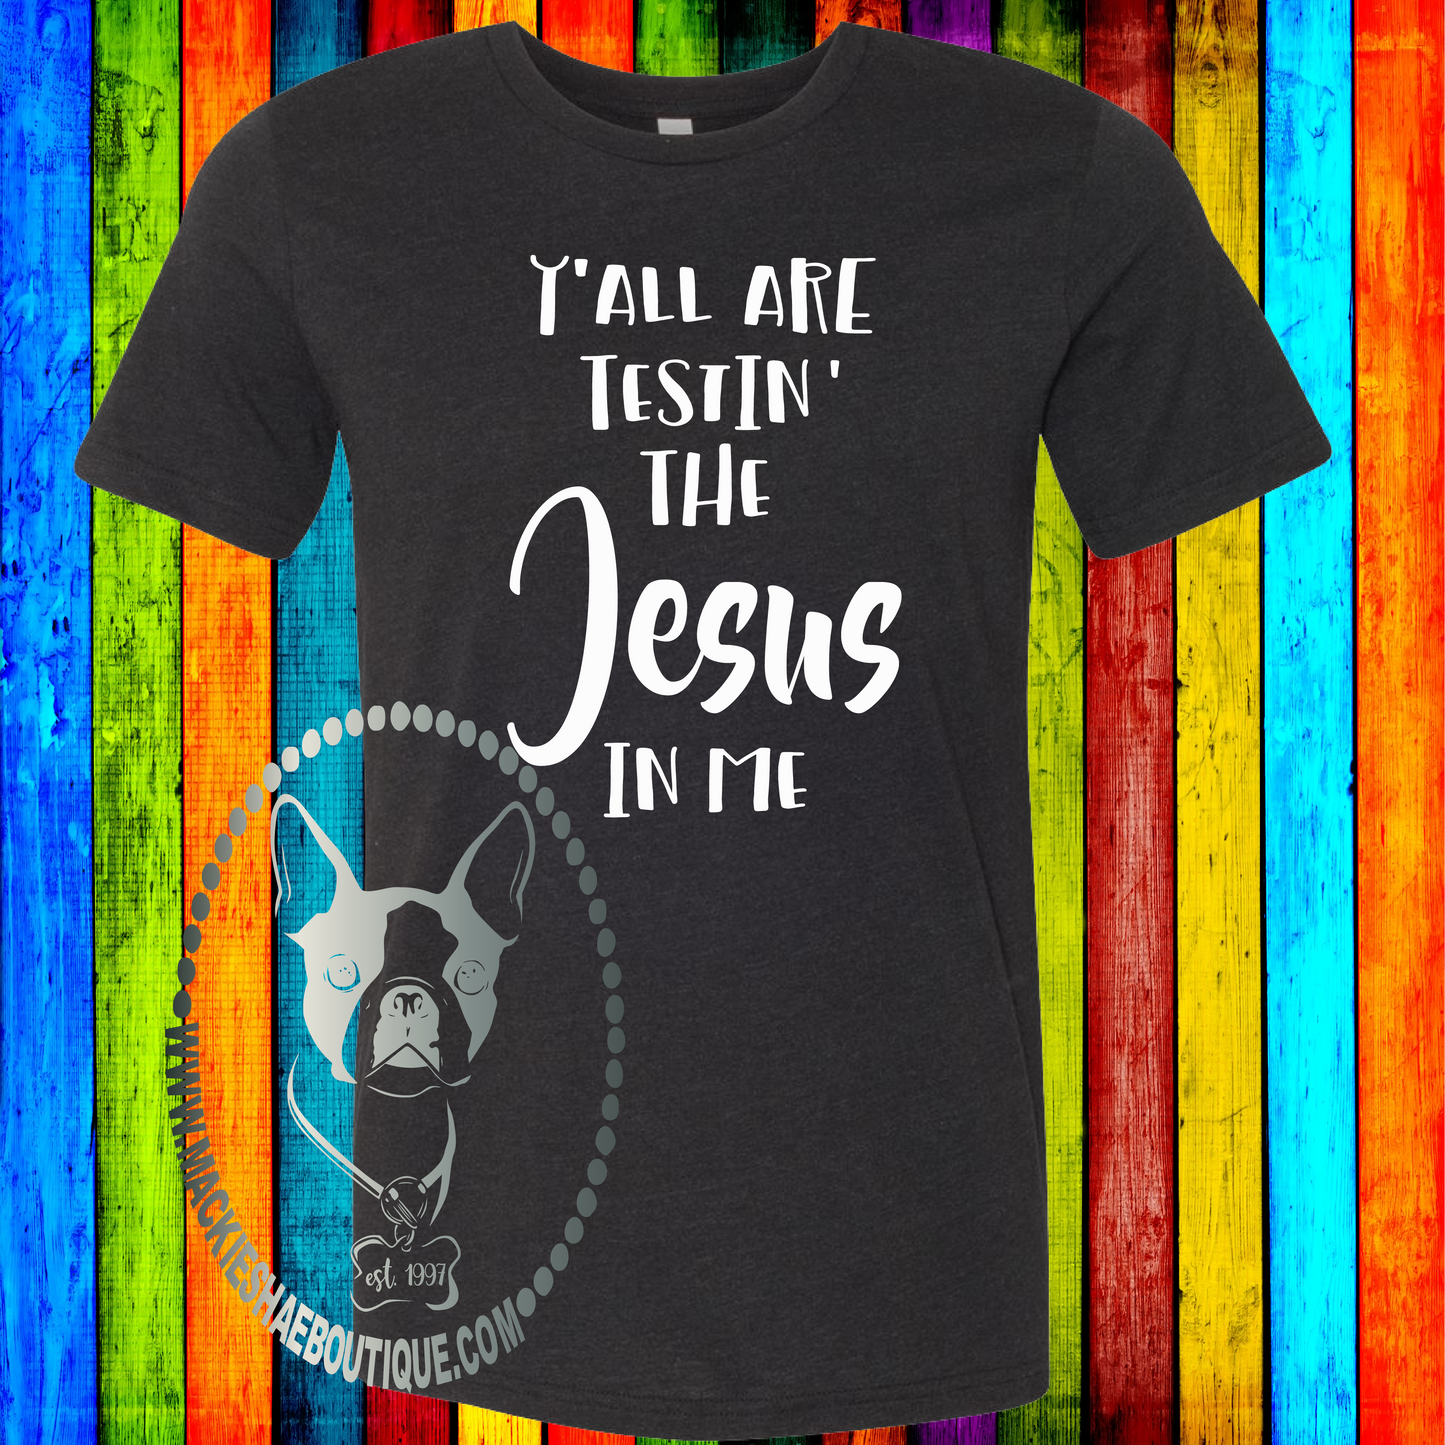 Y'All are Testin' The Jesus in Me Custom Shirt, Soft Short Sleeve